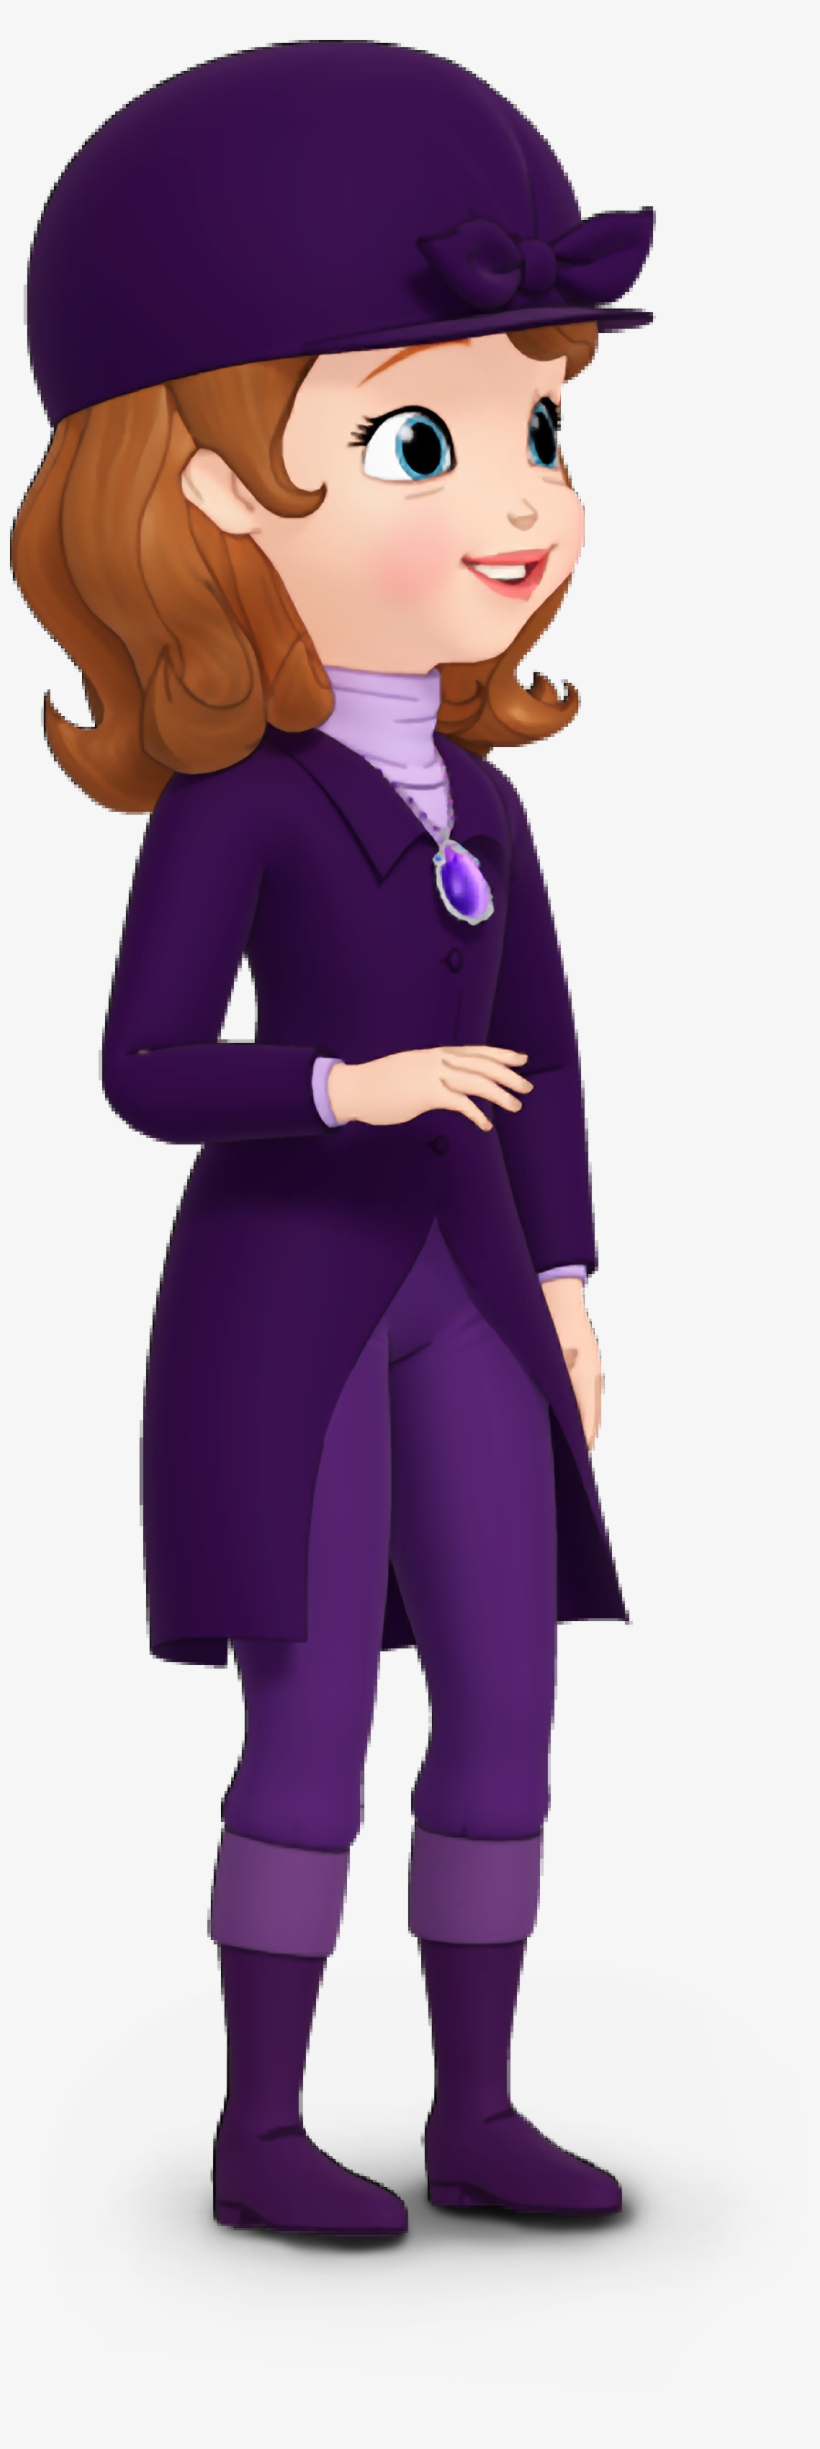 Sofia The First Character Outfits, transparent png #1963456